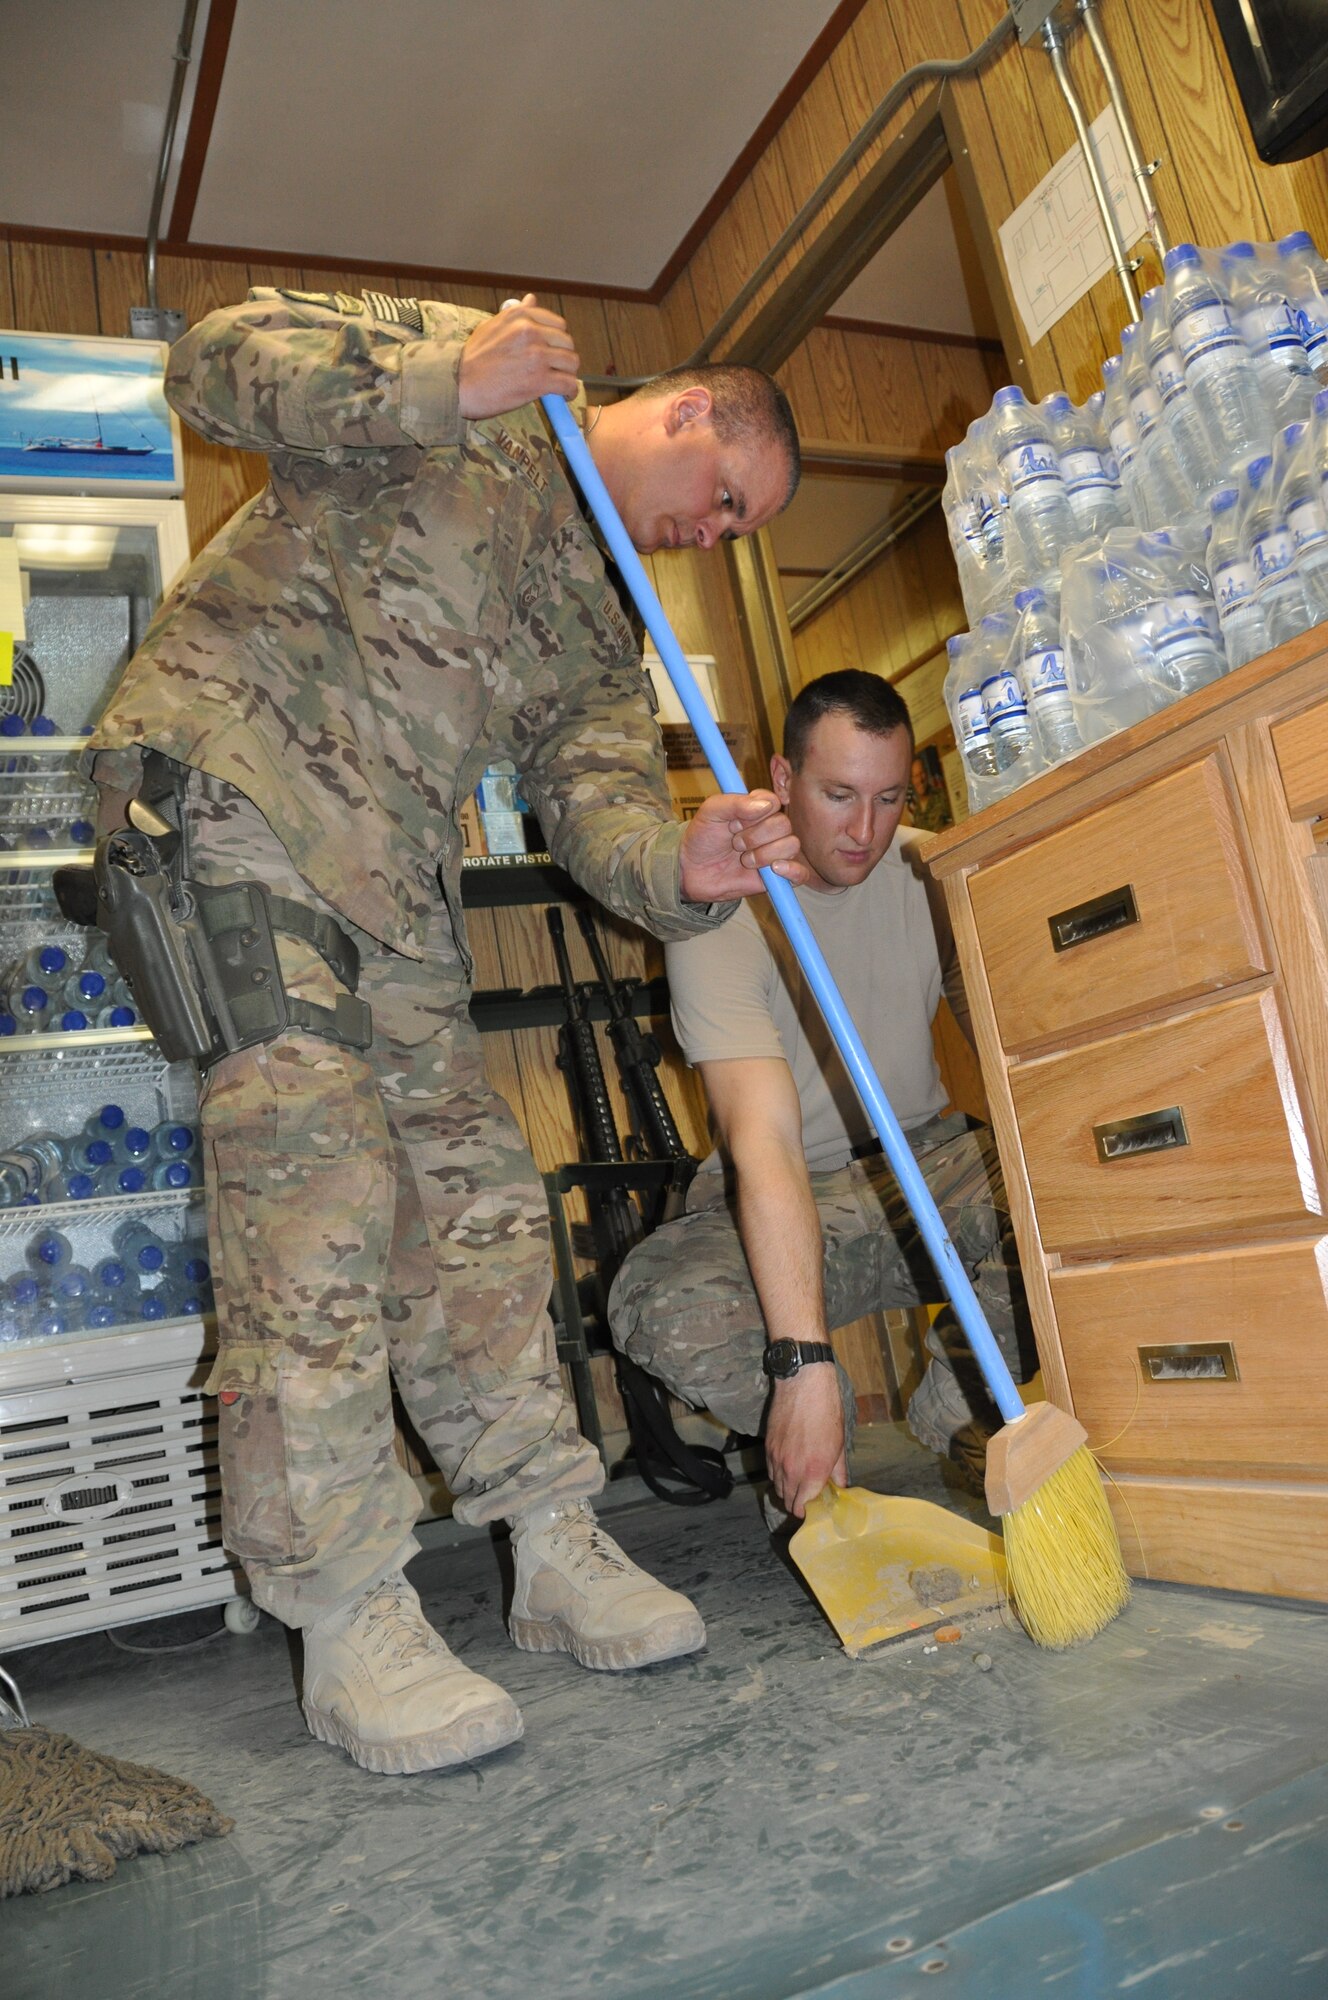 Master Sgt. John Van Pelt, 183d Security Forces Squadron Guard non-commissioned officer in charge of Echo Sector and Senior Airman Gregory Skrjanc, 455th Expeditionary Security Forces Squadron Echo controller, are deployed to Bagram Airfield, Afghanistan. The service members volunteered their time during the 'Spring Cleaning in the Fall' project that organized and rearranged the Airman Ministry Center here Aug. 16, 2013. (U.S. Air Force Photo/Tech. Sgt. Rob Hazelett)